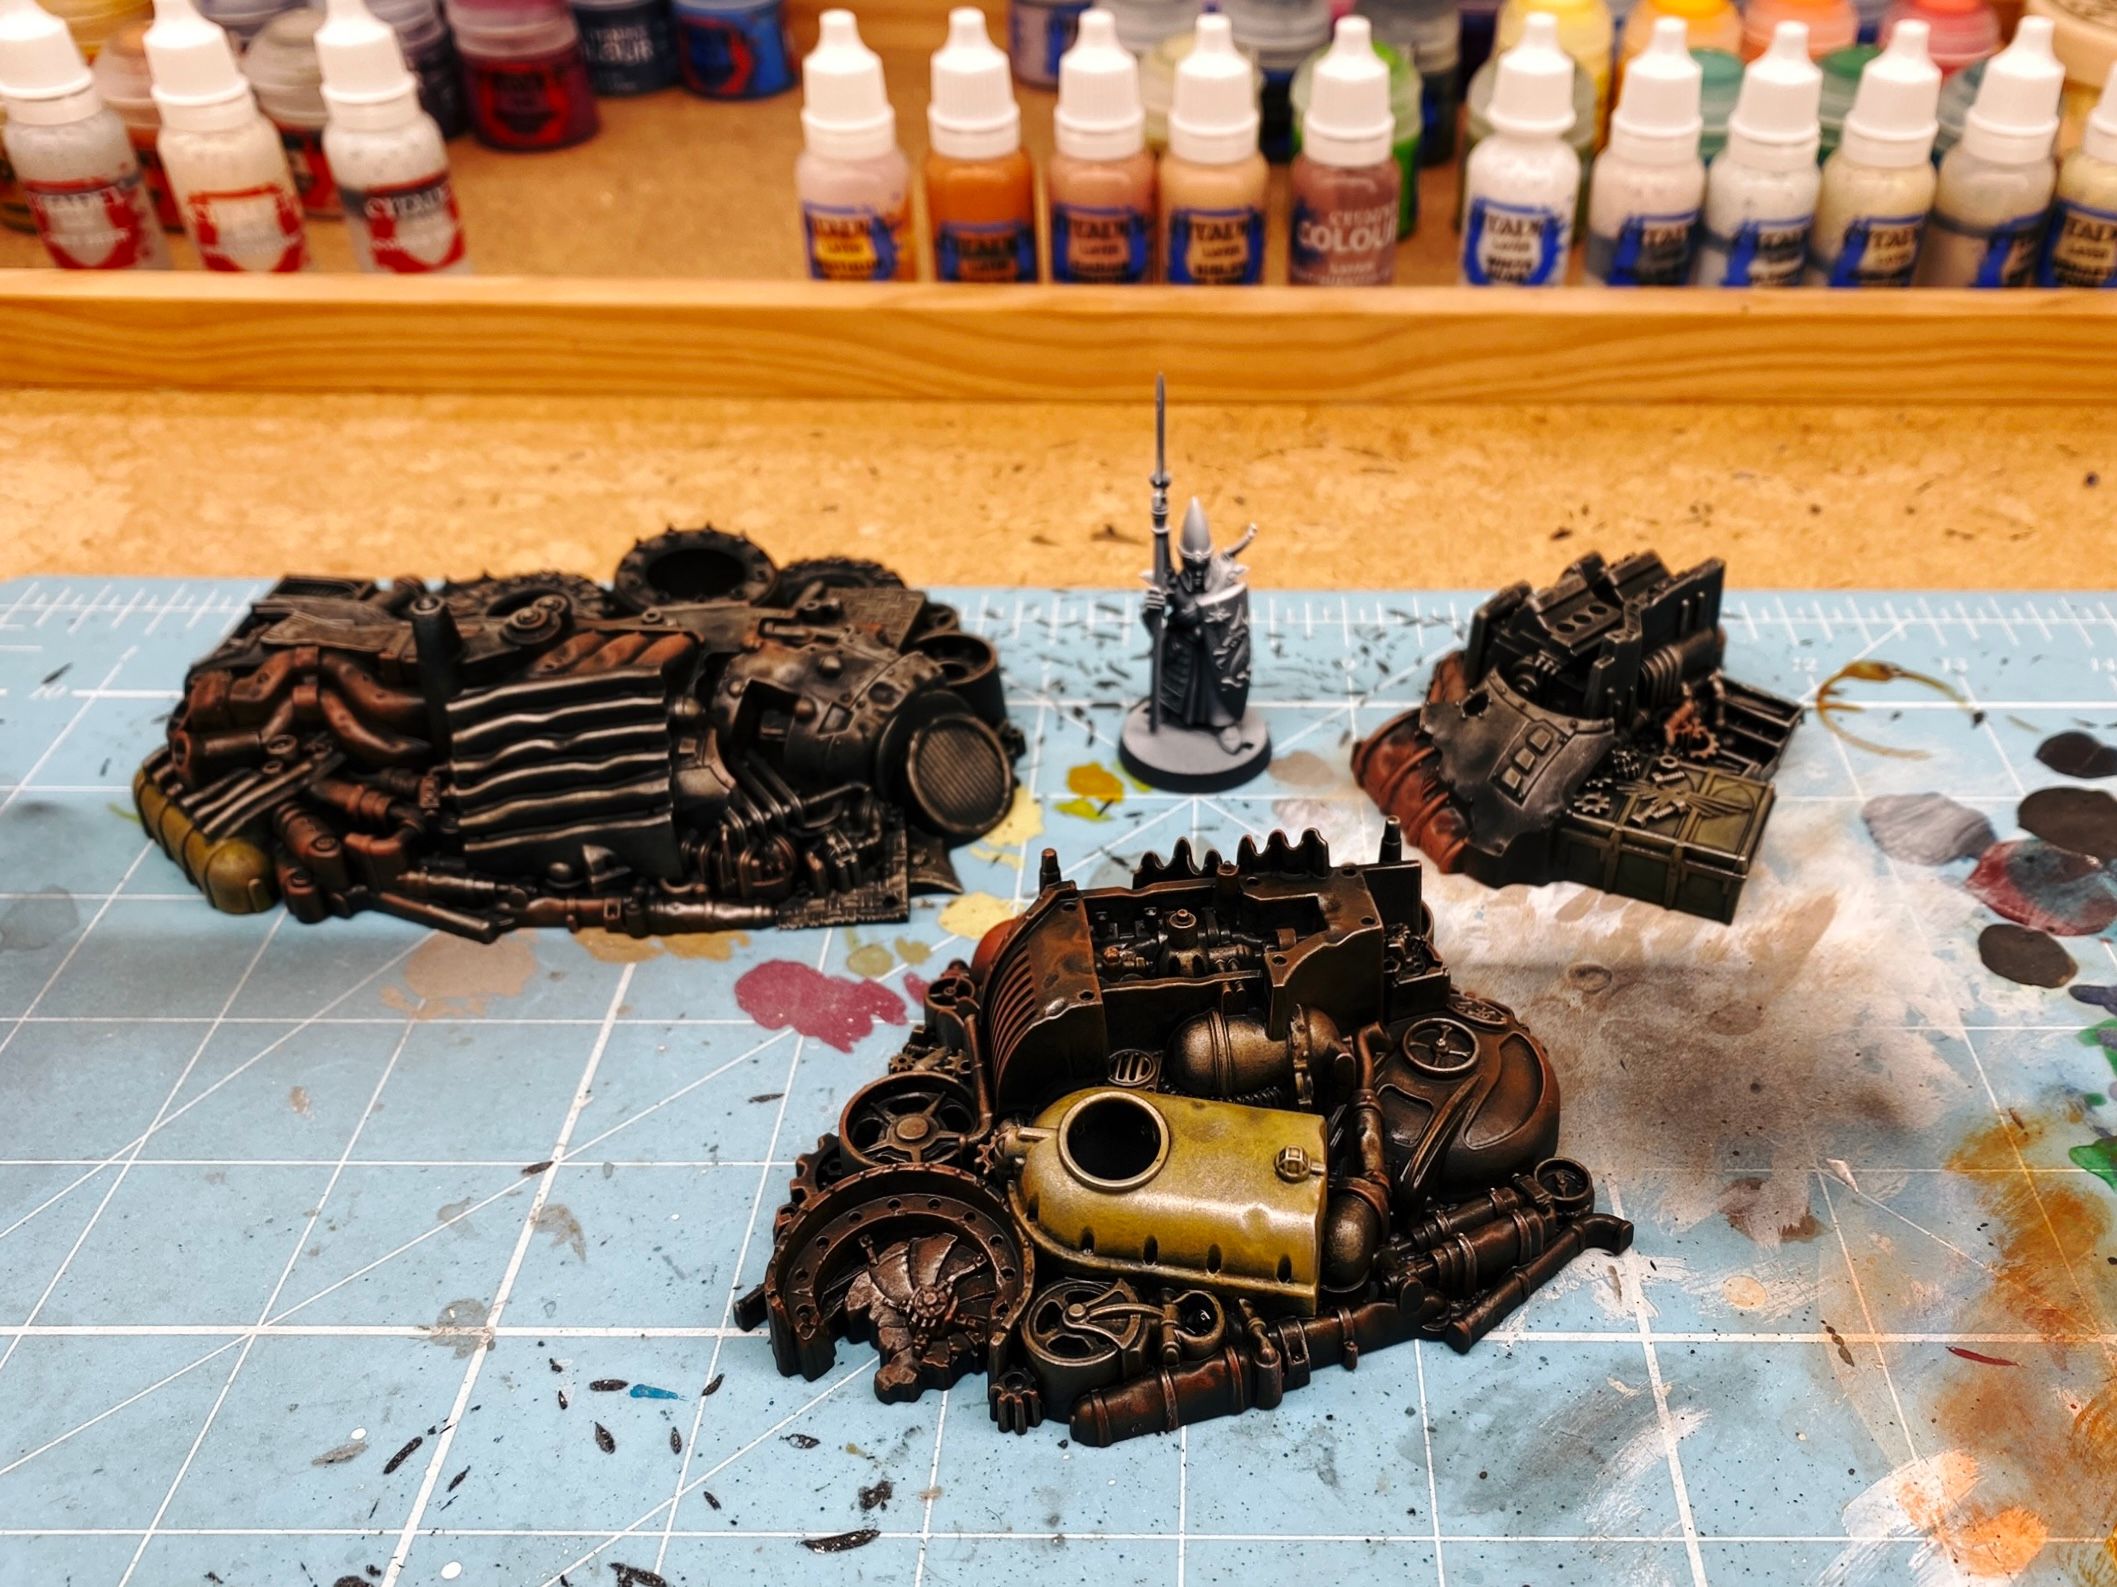 A photo of three of the terrain scrap/junk piles from the Warhammer 40,000 Kill Team: Octarius box that came out in July last year and has remained shamefully unpainted until now. They're all just a jumble of pipes and scraps of metal and fans and fuel tank and gears and such, and all are brown and worn and rusty-looking.